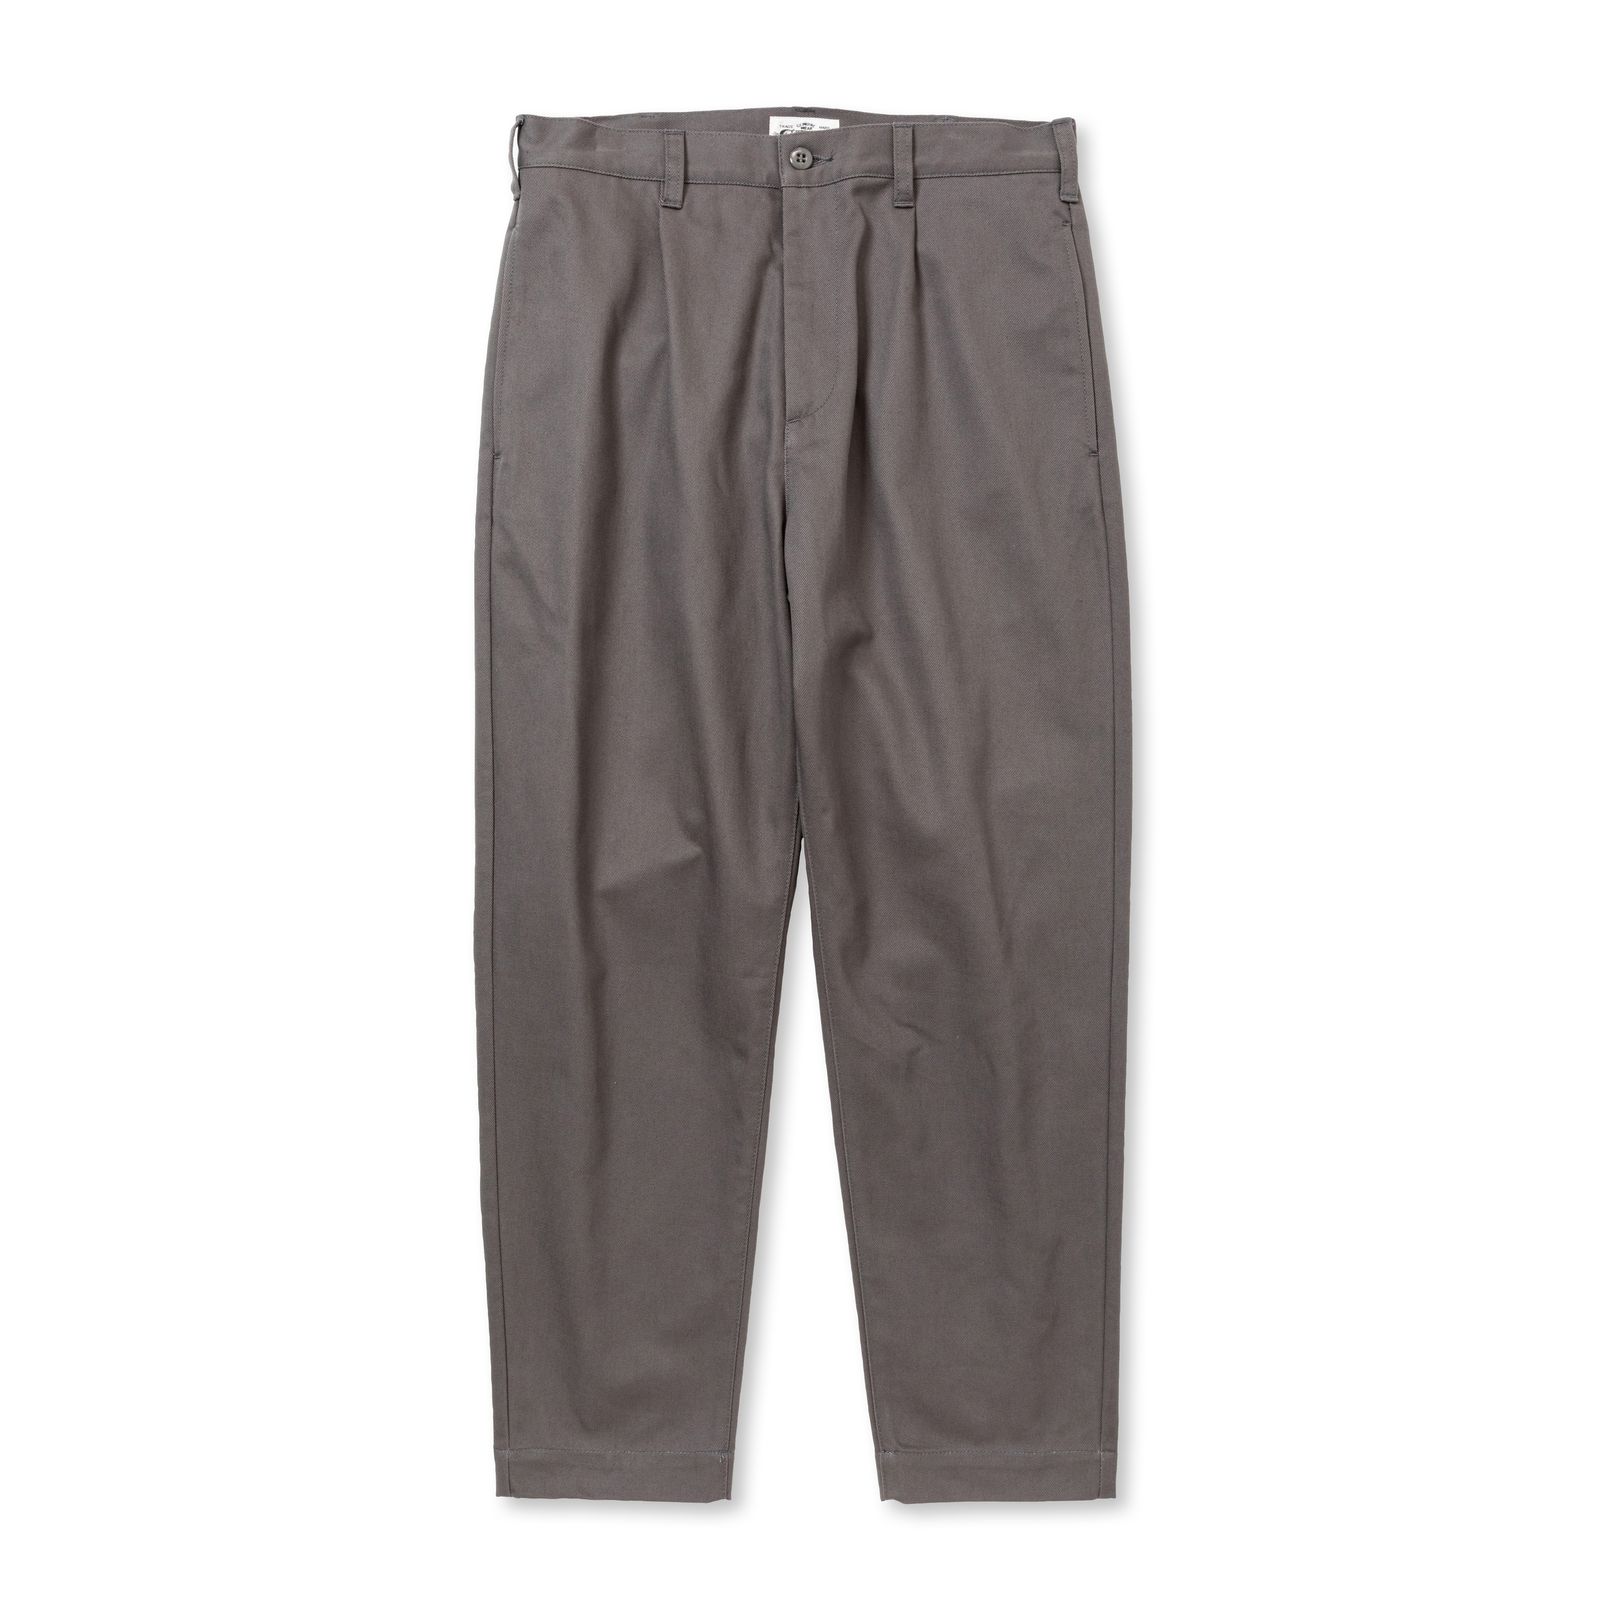 CALEE - VINTAGE TYPE CHINO CLOTH TUCK TROUSERS (GRAY